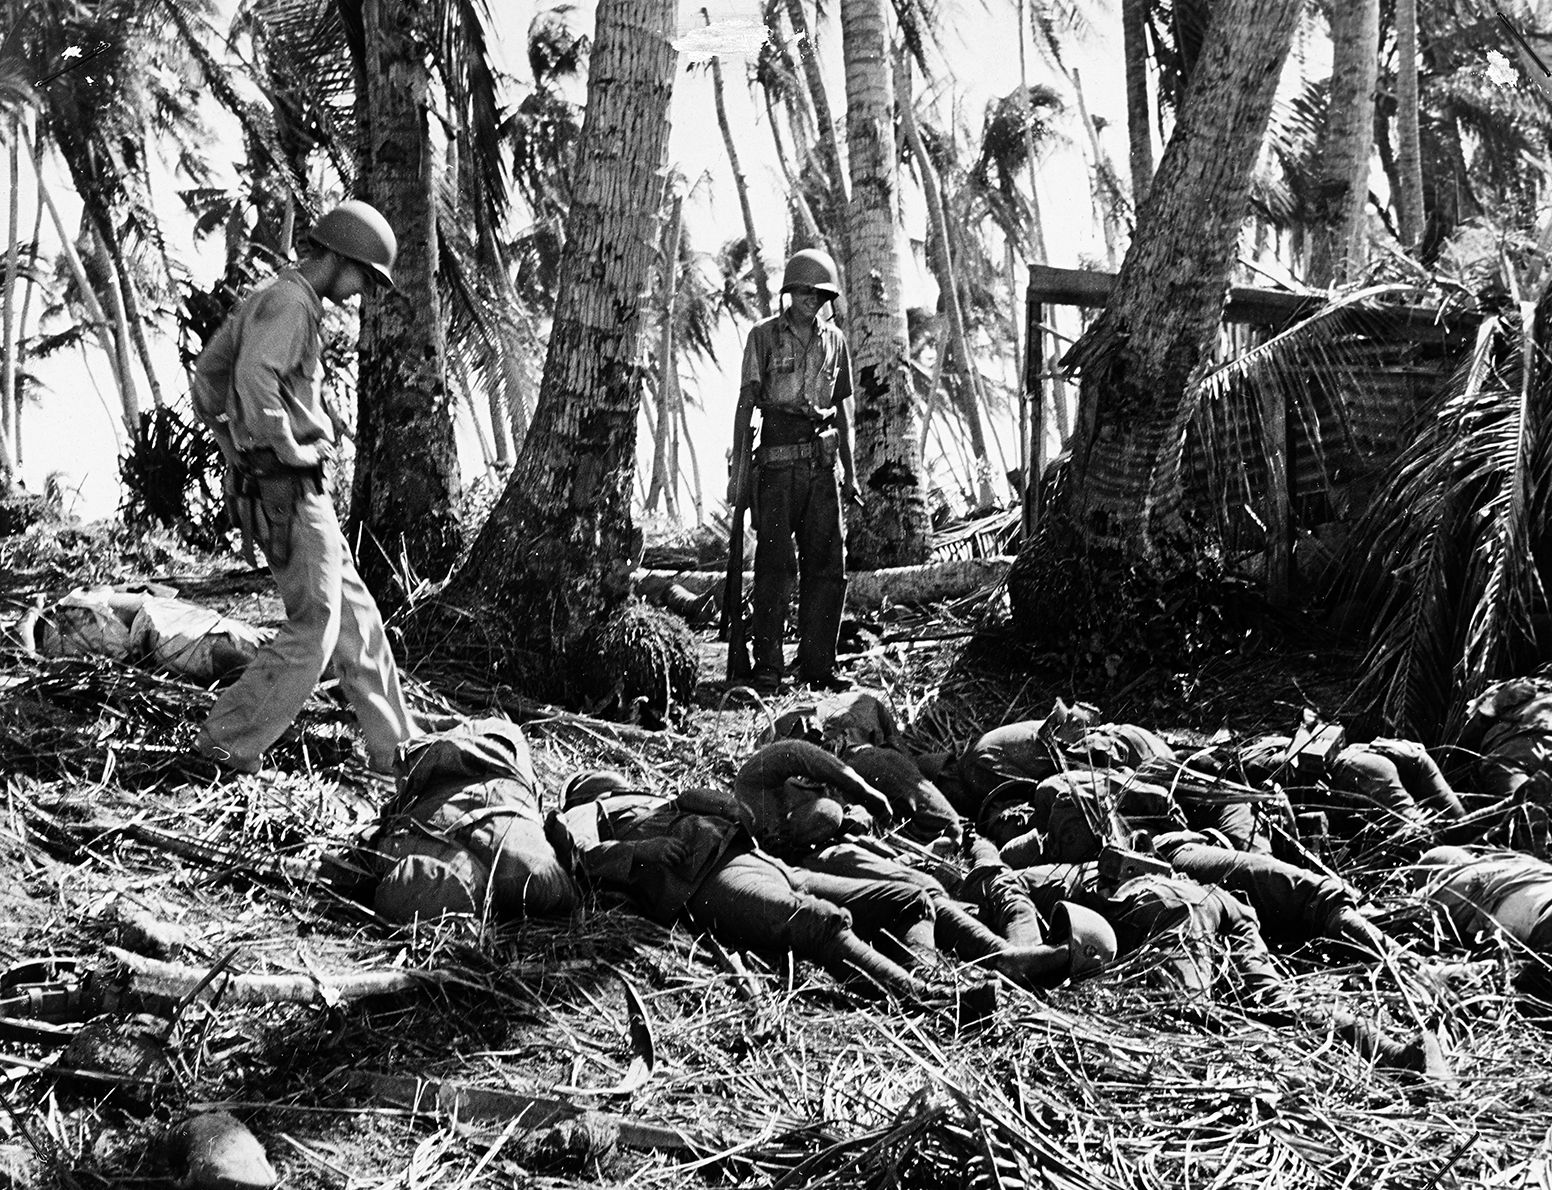 After reaching the beach at Makin, U.S. Coast Guardsmen in service with the Navy inspect the corpses of Japanese soldiers killed defending the atoll. These Coast Guardsmen were probably operating one of the landing craft that brought soldiers of the 27th Infantry Division ashore hours earlier.